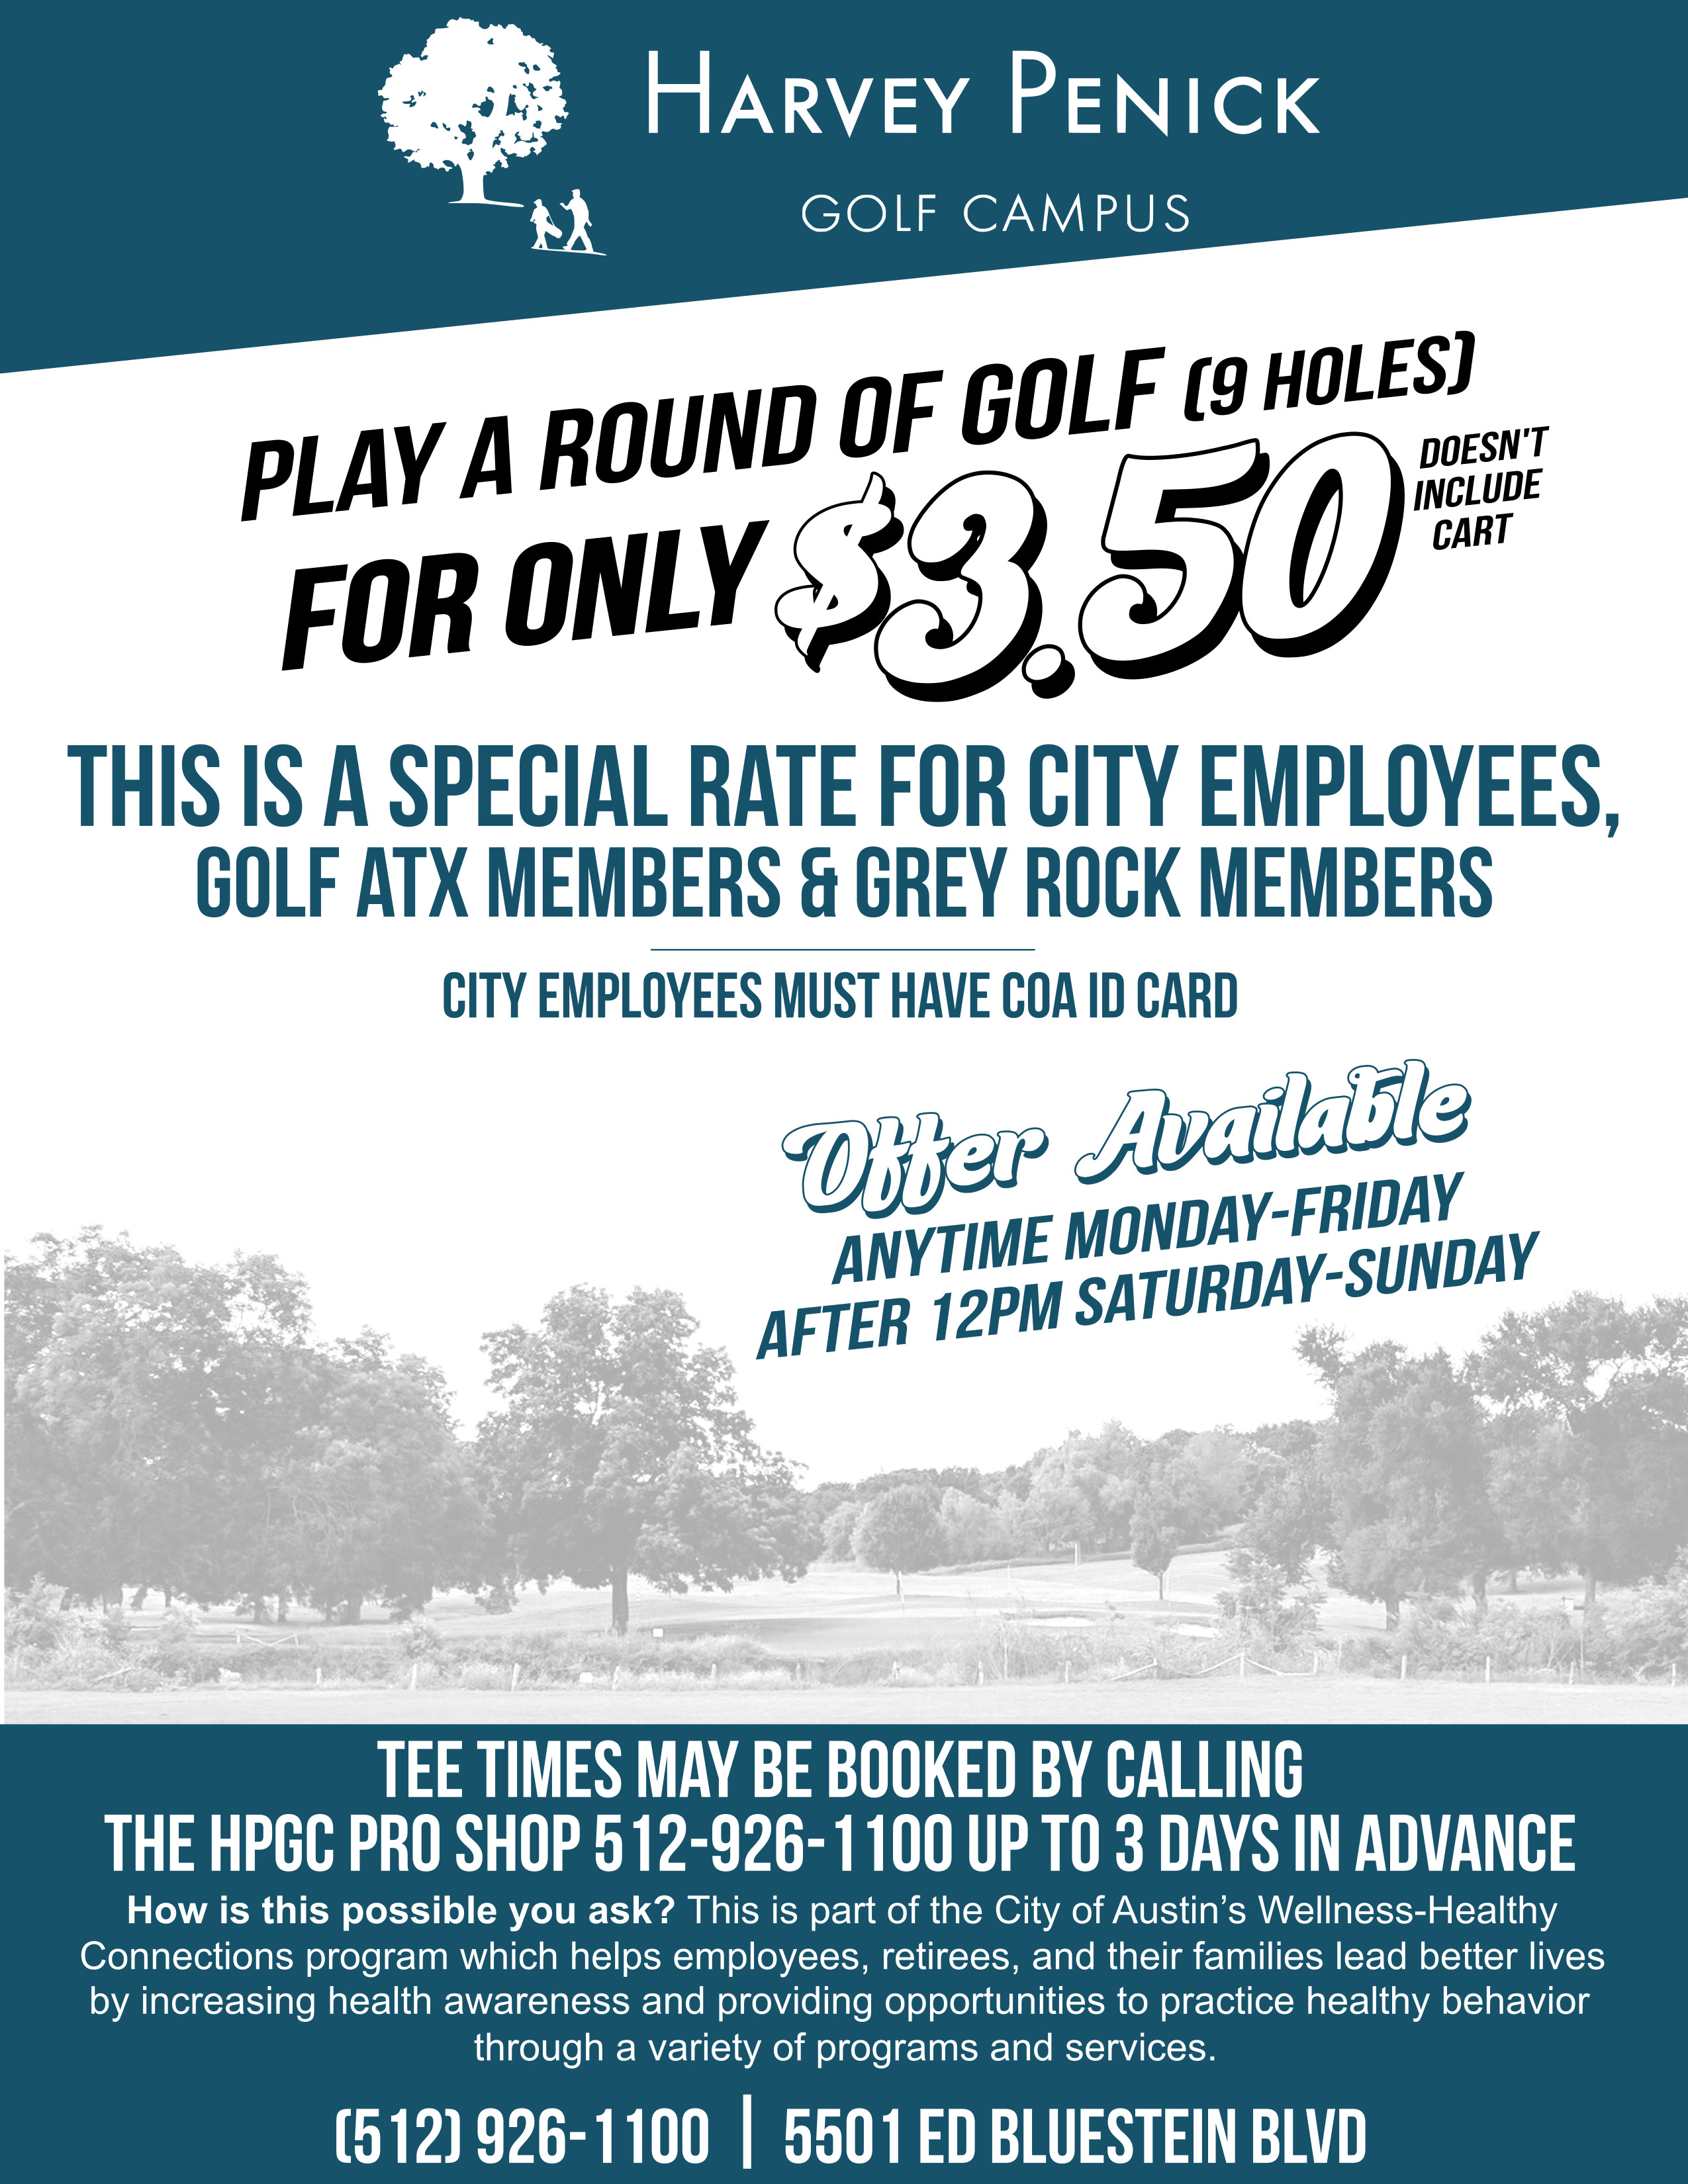 golfatx-and-city-of-austin-employee-discount-harvey-penick-golf-campus